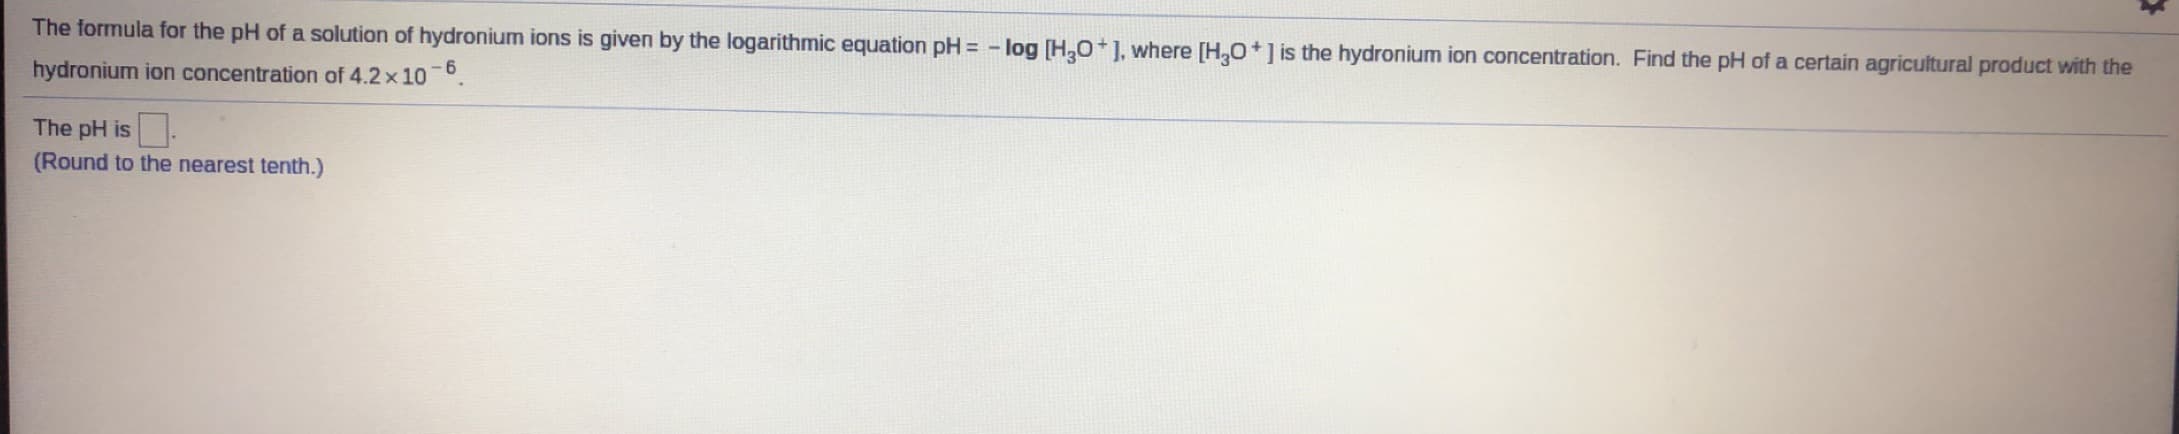 The formula for the pH of a solution of hydronium ions is given by the logarithmic equation pH = - log [H,0+], where [H,O+] is the hydronium ion concentration. Find the pH of a certain agricultural product with the
hydronium ion concentration of 4.2 x 10
- 6
The pH is.
(Round to the nearest tenth.)
